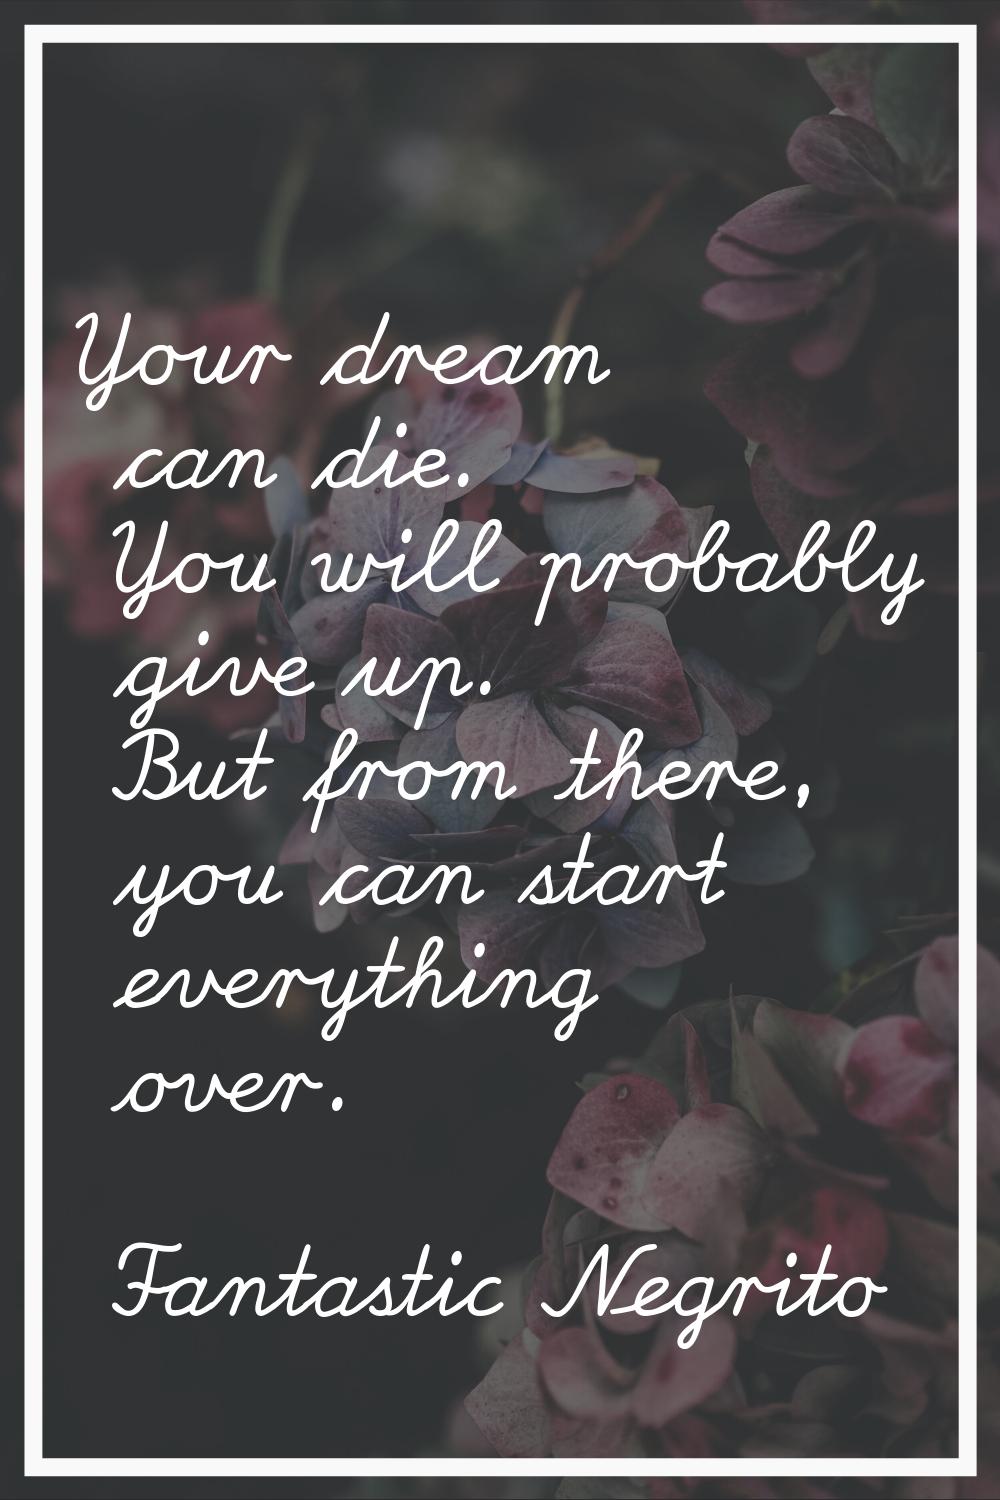 Your dream can die. You will probably give up. But from there, you can start everything over.